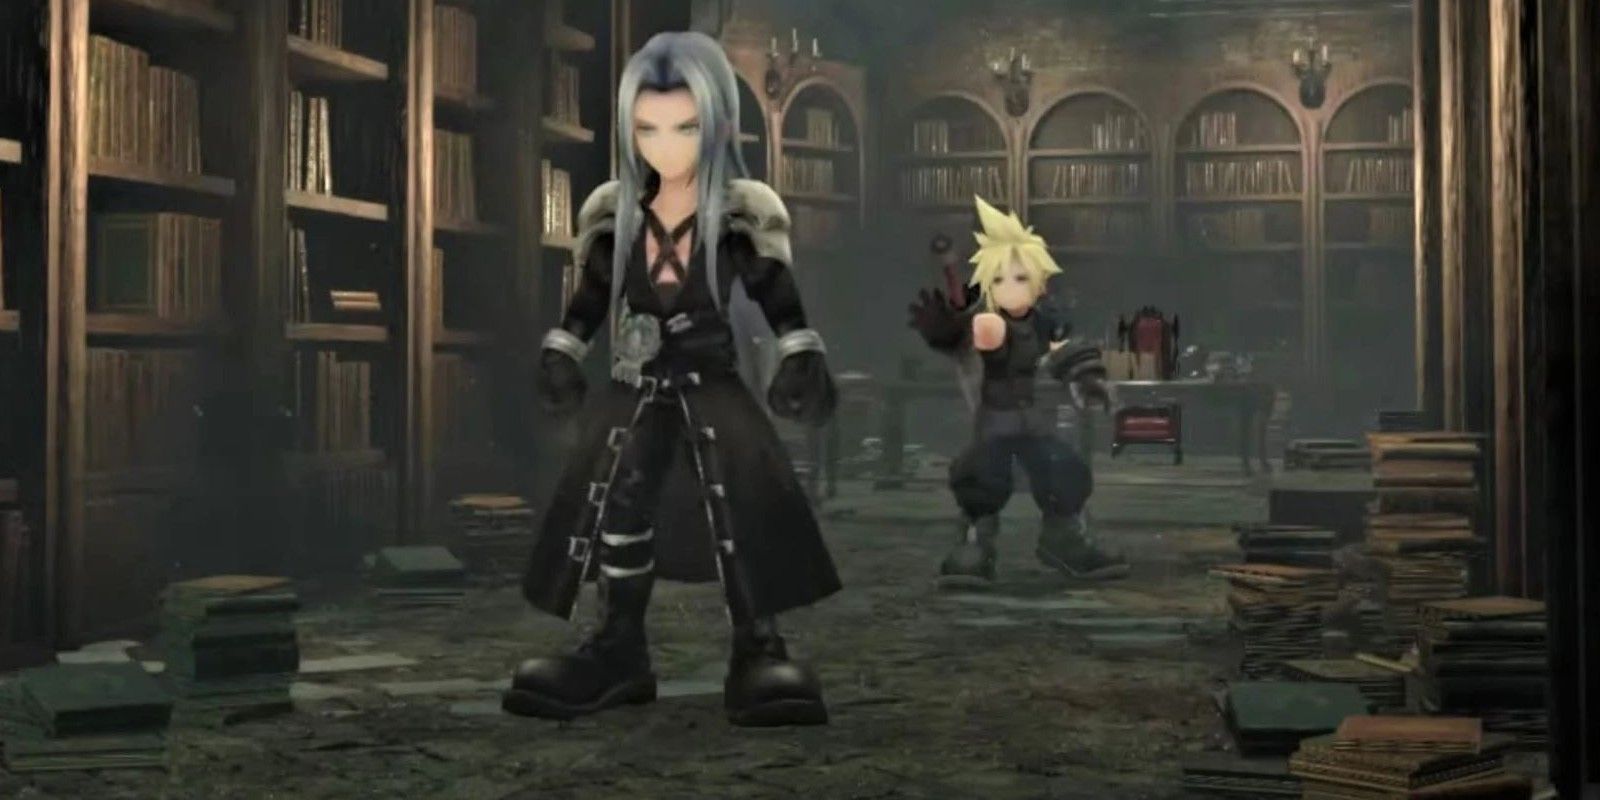 Screen shot of Cloud and Sephiroth at the Shinra mansion in Ever Crisis, an FF7 remake compilation for mobile devices.